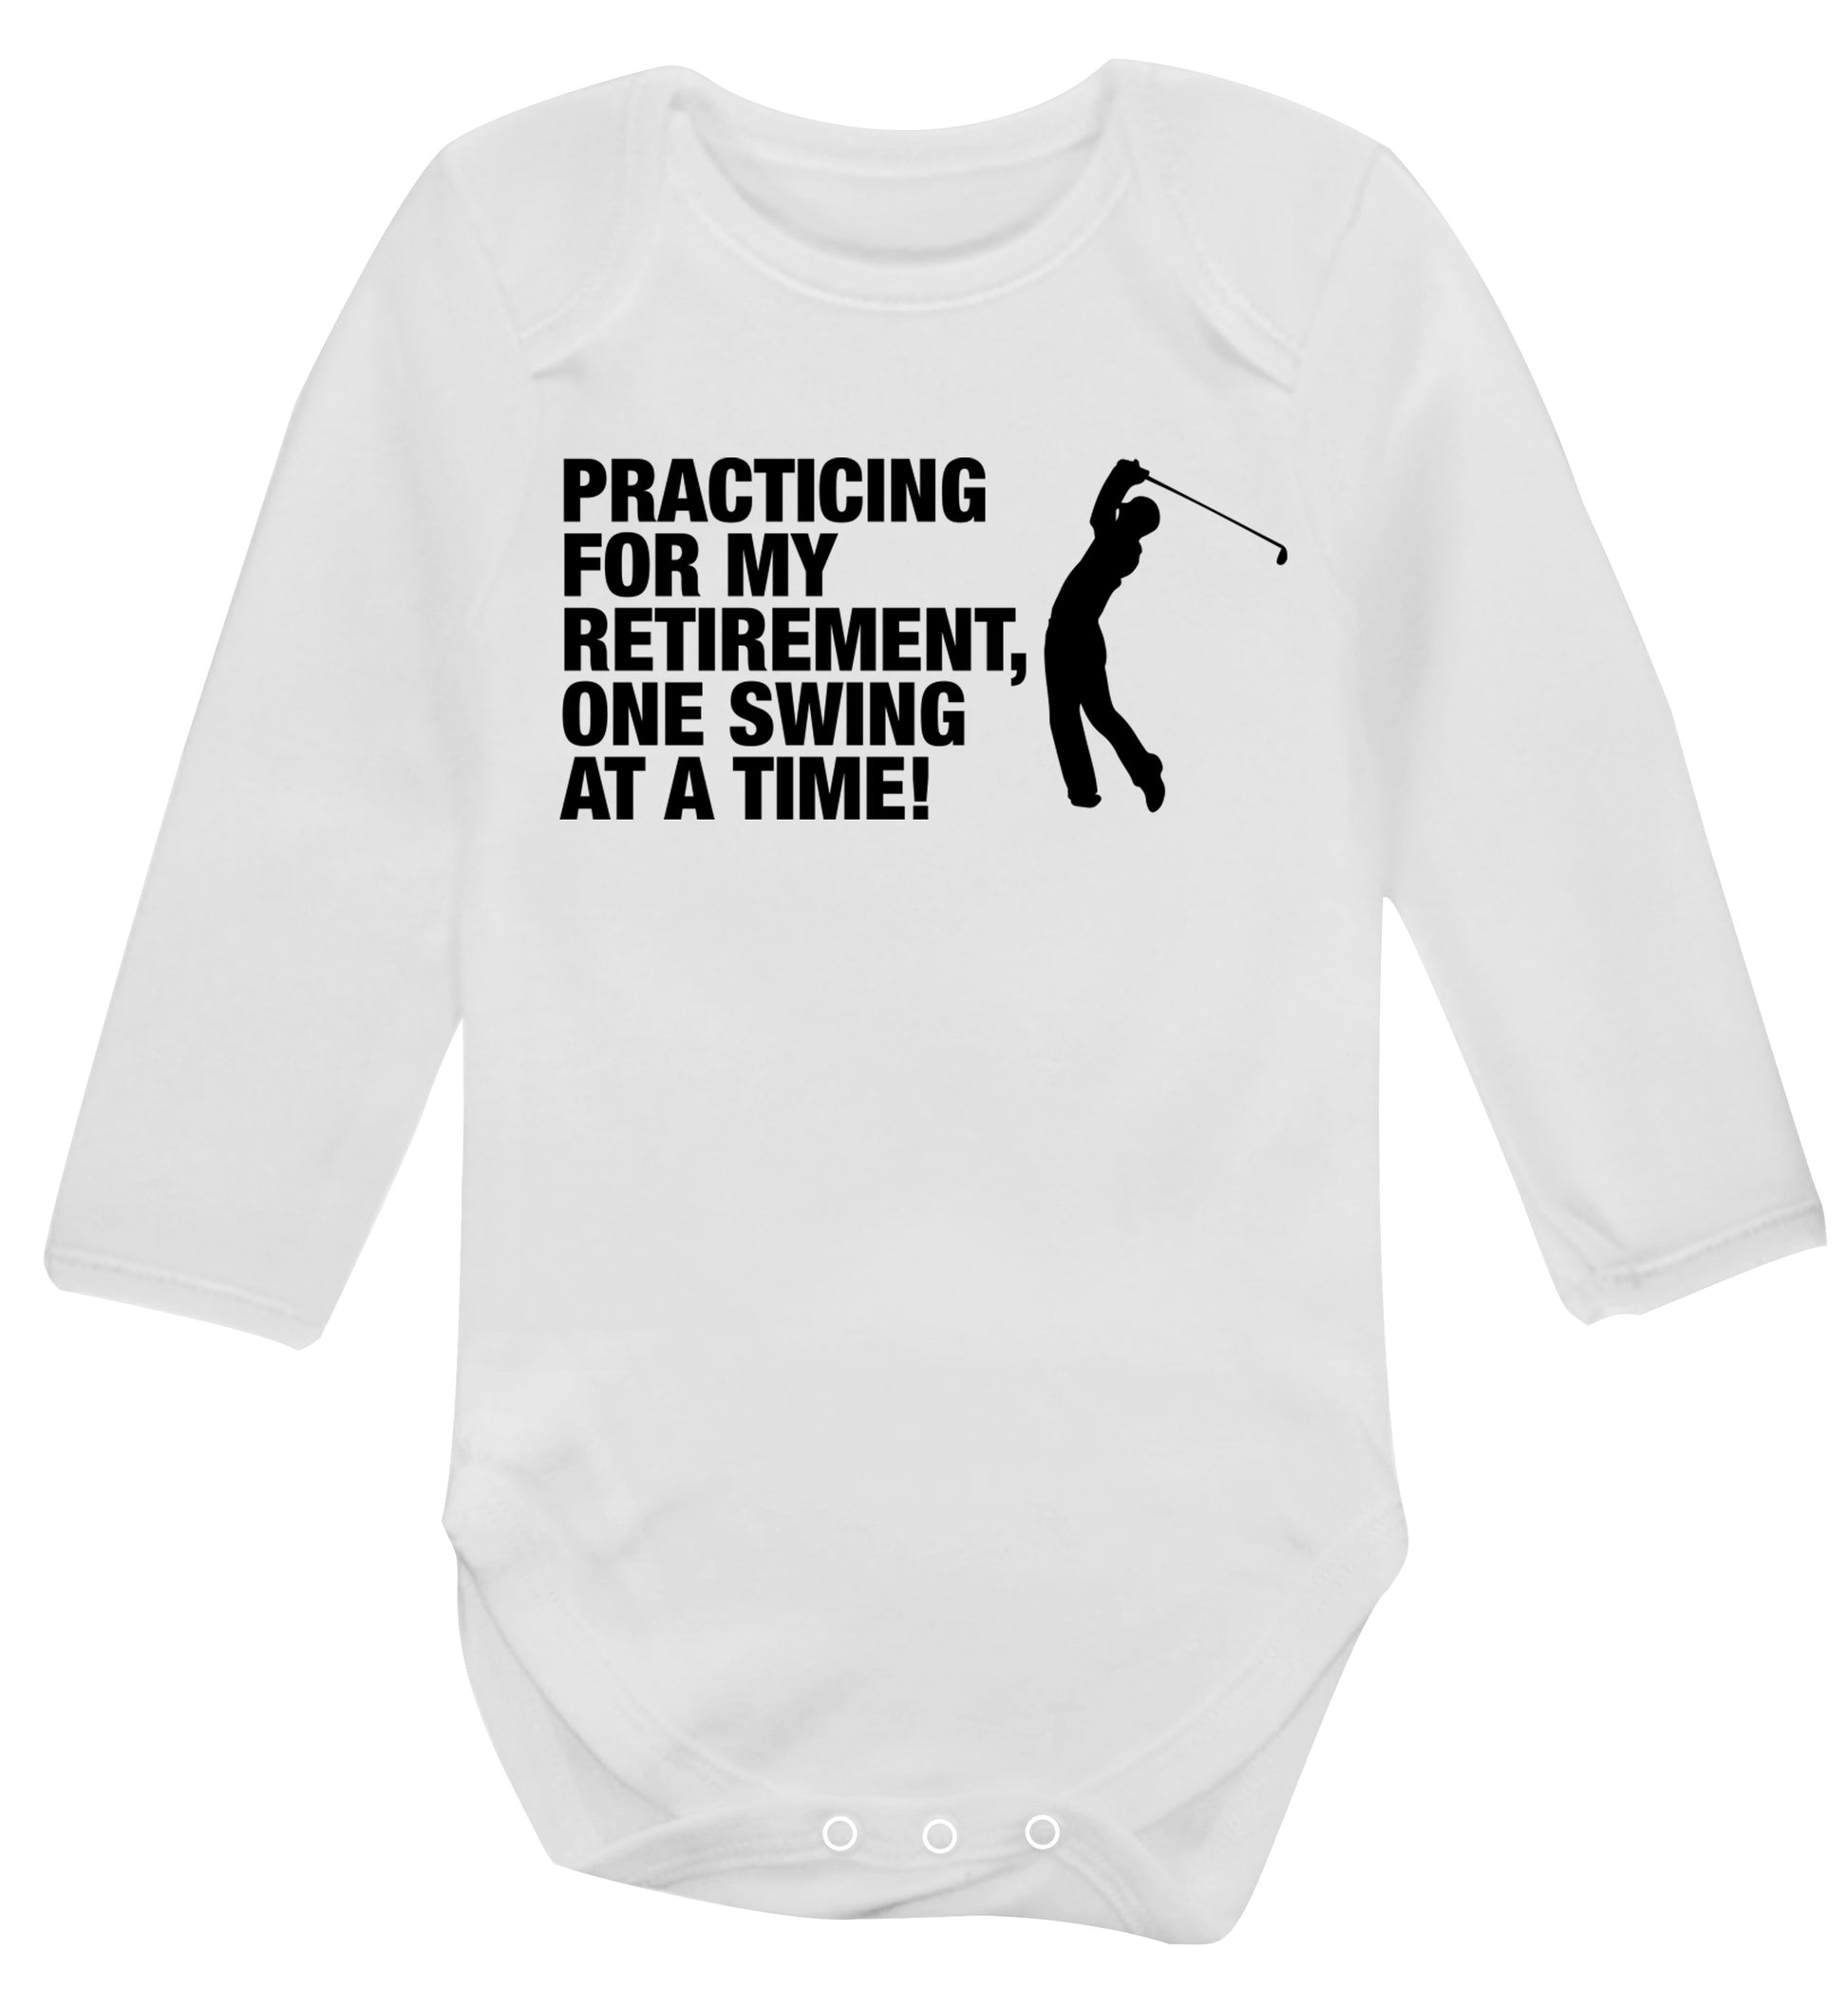 Practicing for my retirement one swing at a time Baby Vest long sleeved white 6-12 months